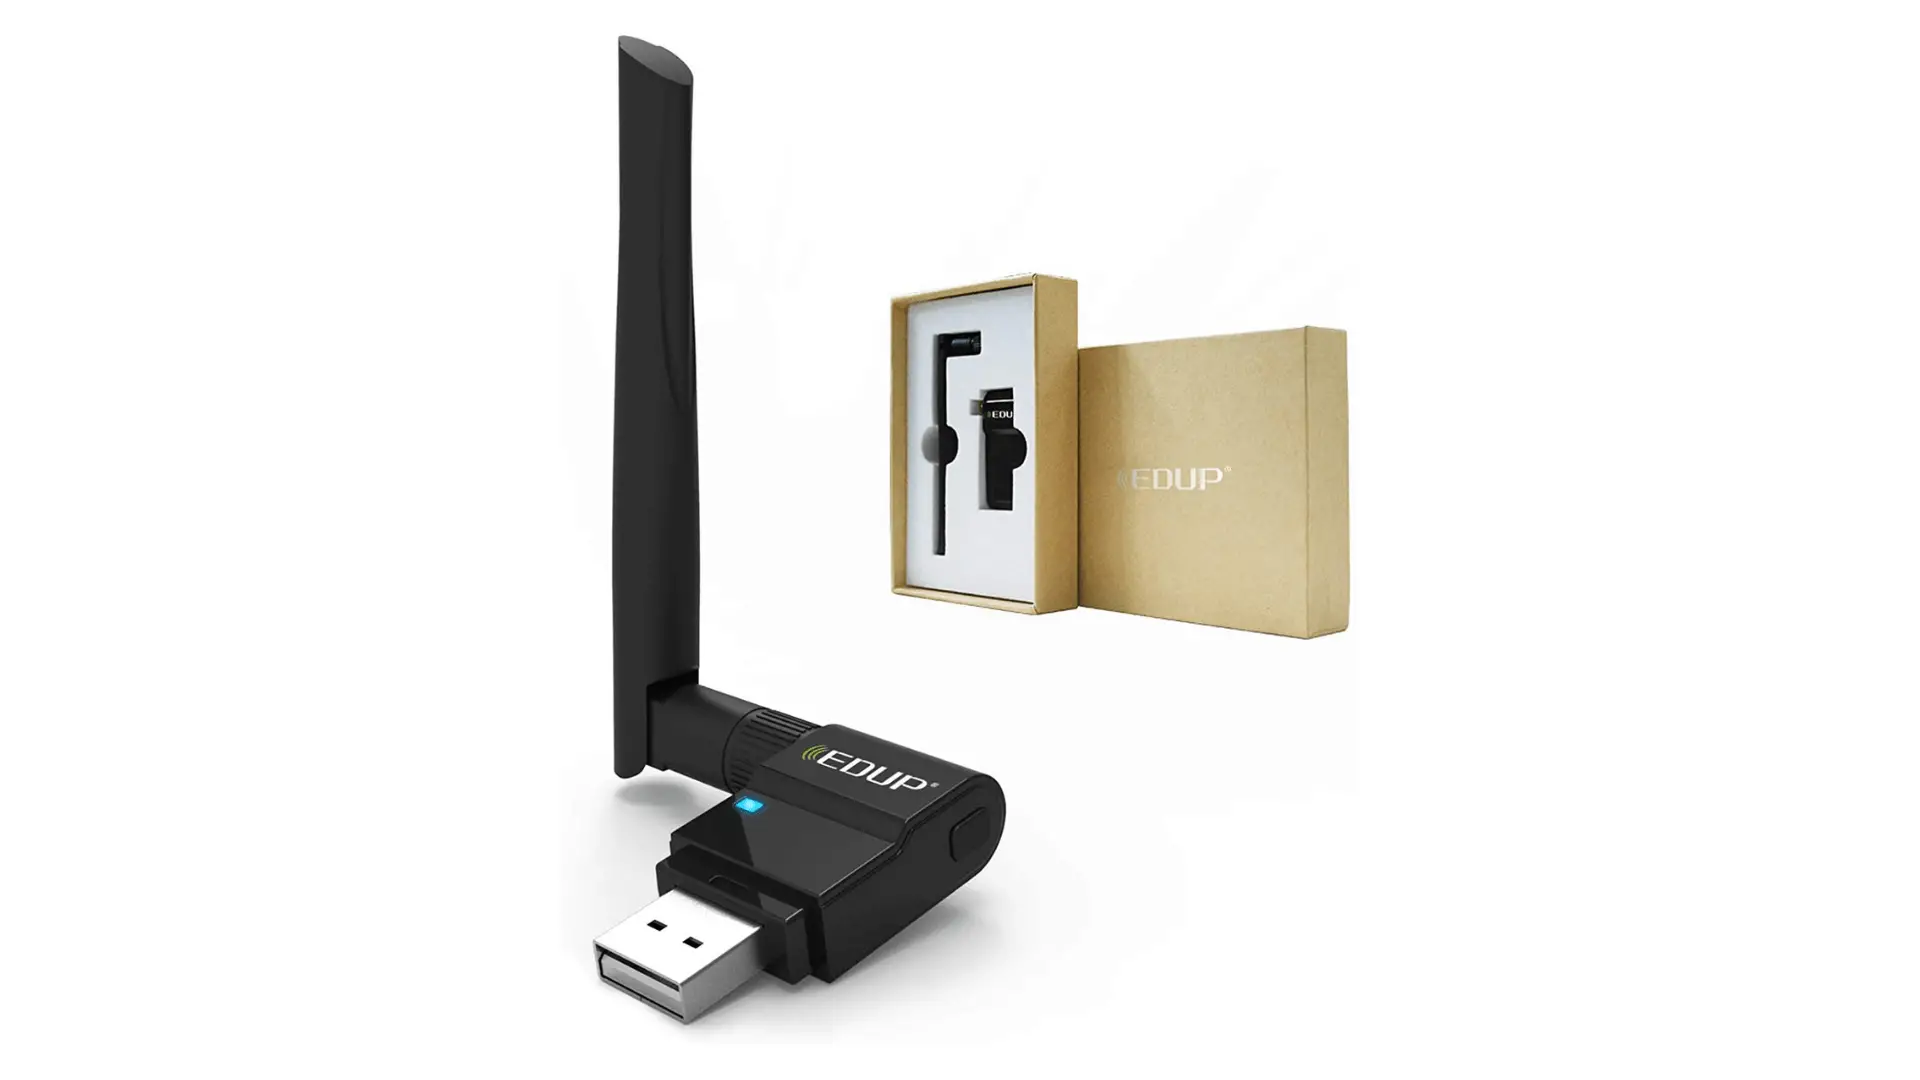 The EDUP EP-AC1635 WiFi adapter with an adjustable antenna in black, accompanied by the box at the back